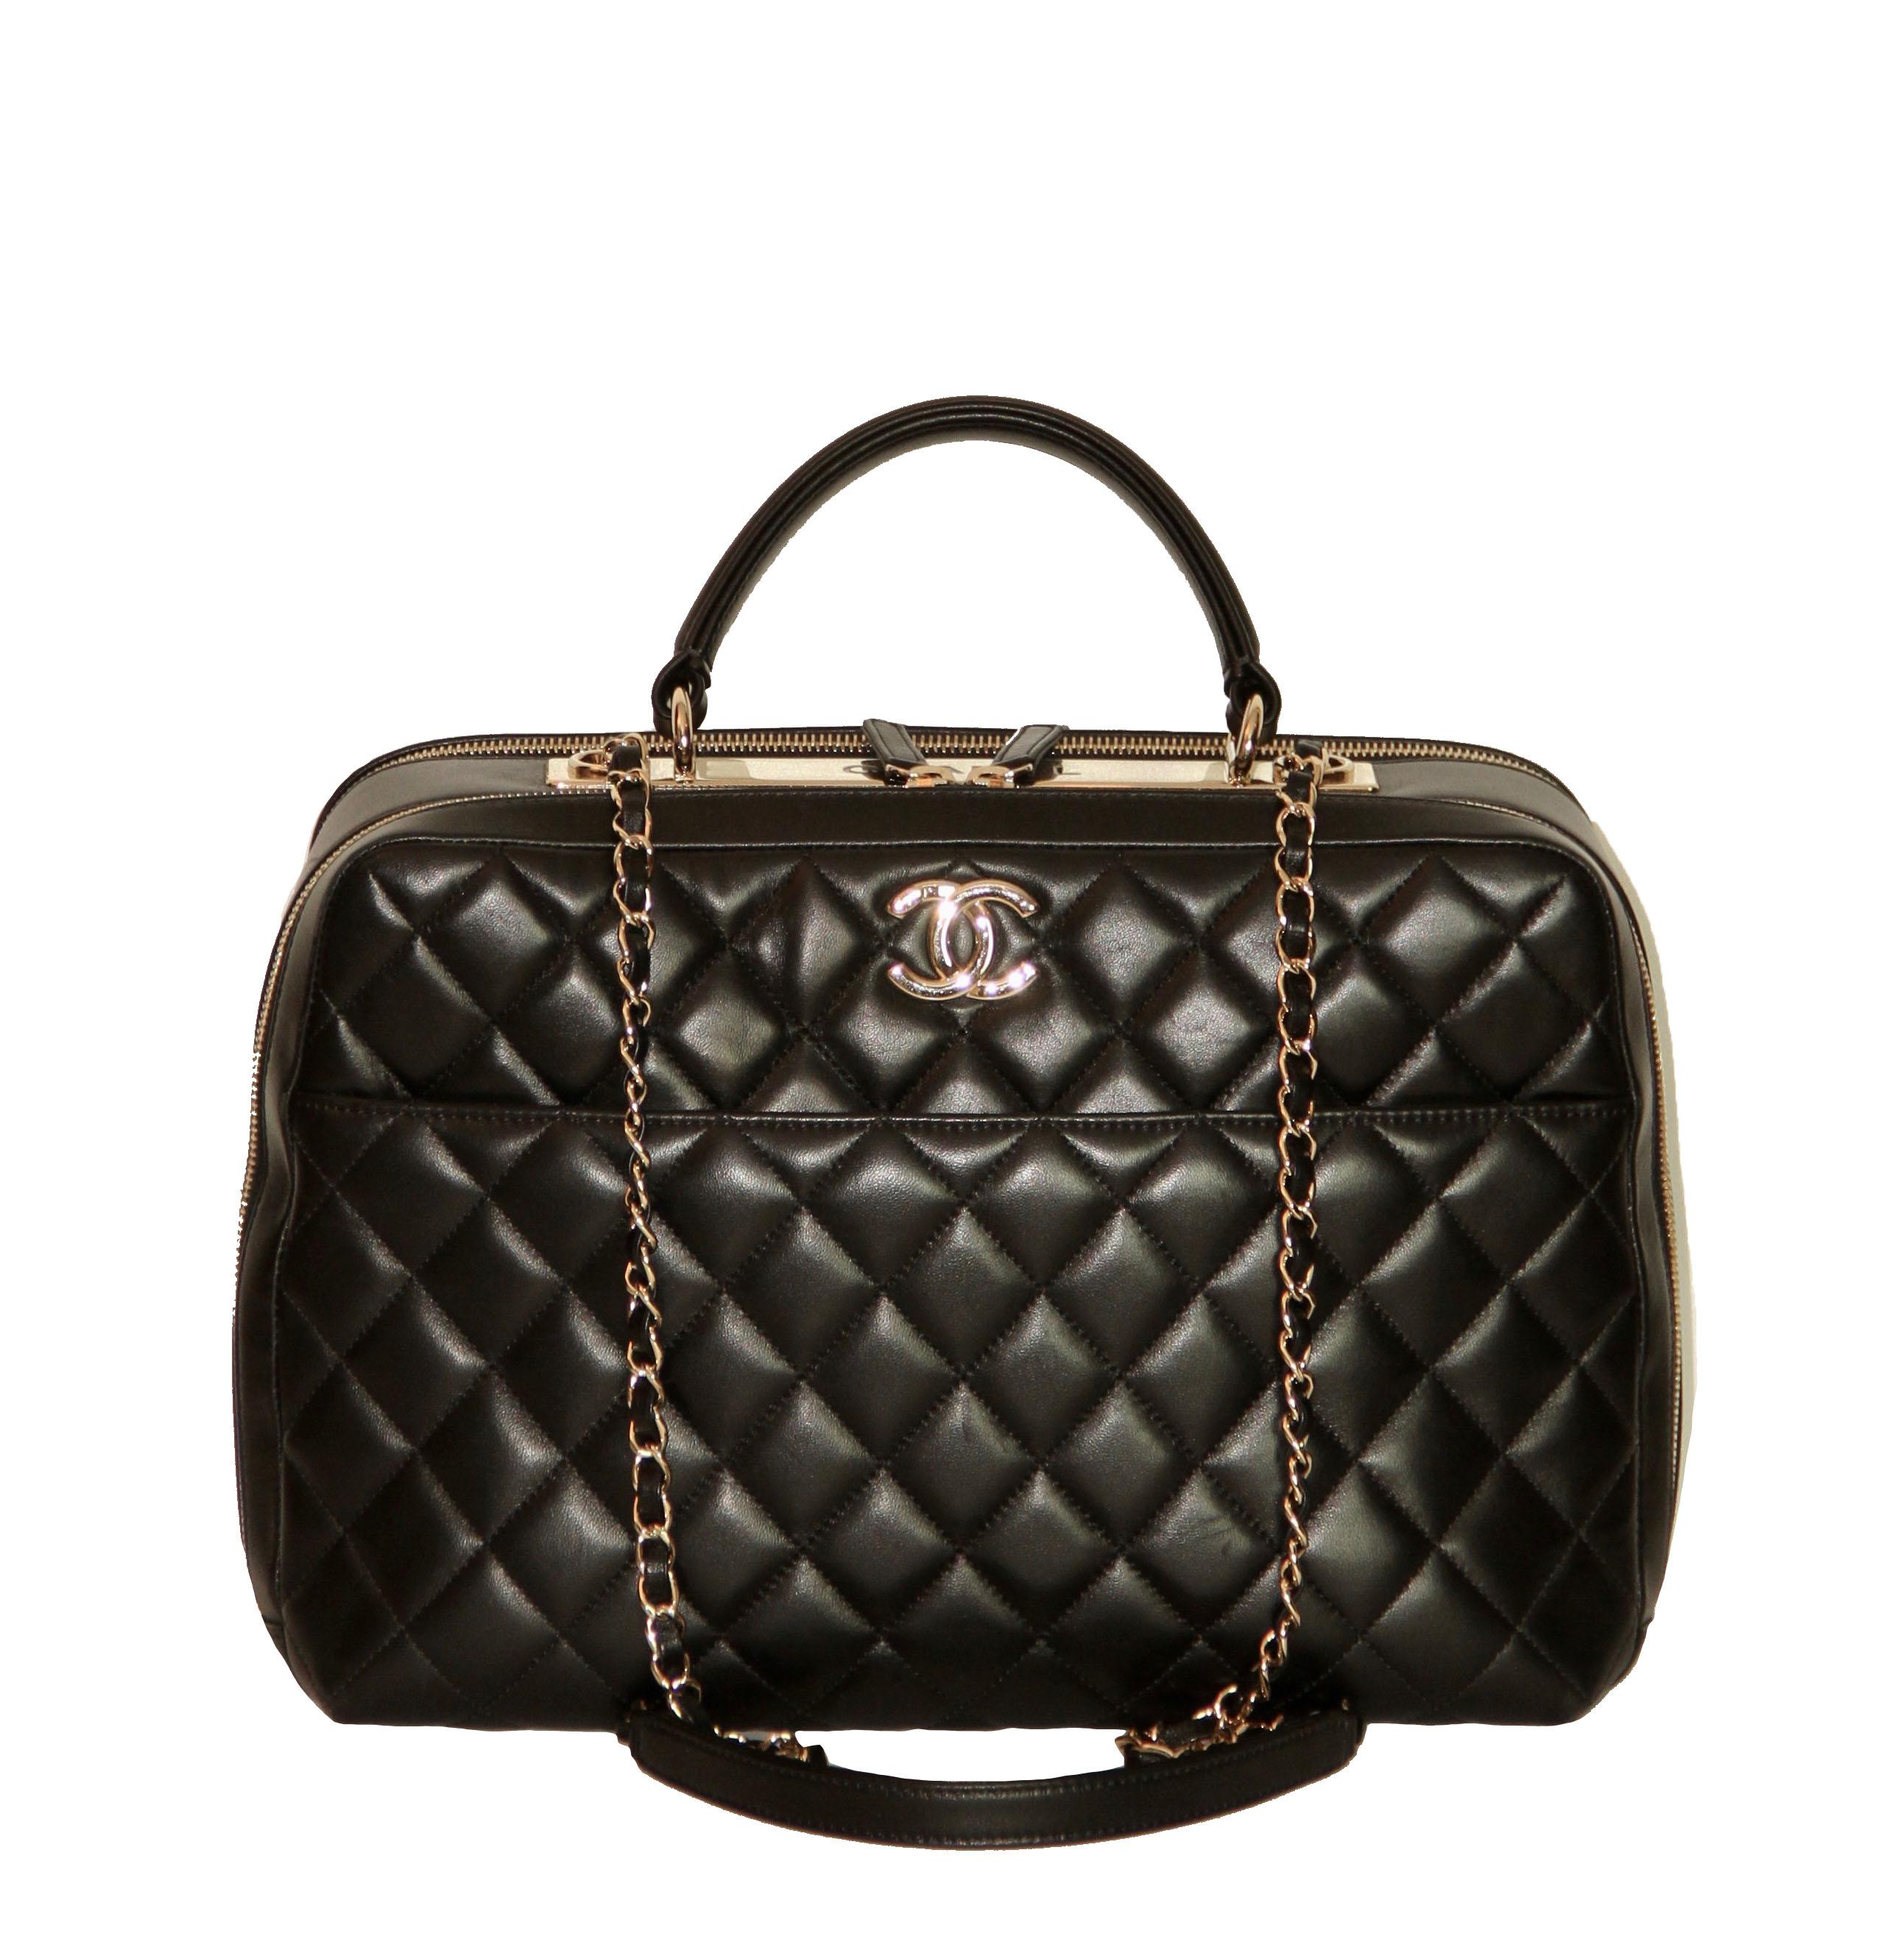 Gorgeous and chic pre-owned Chanel bag from the 